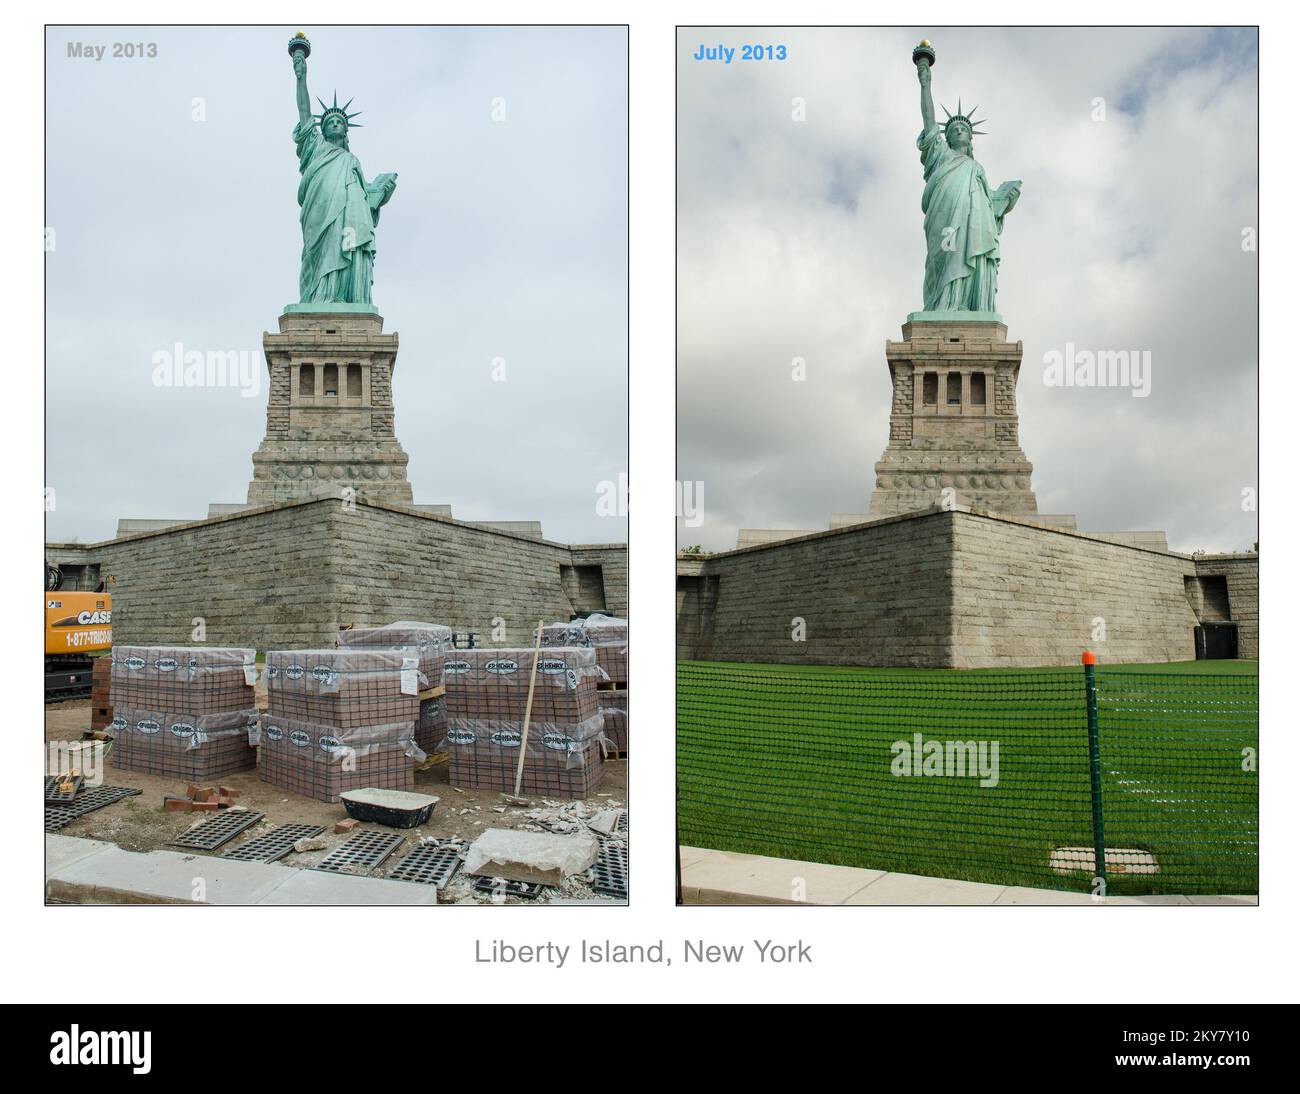 Liberty Island, N.Y., July 4, 2013   Hurricane Sandy flooded 75 percent of the island in October 2012, causing major damage to its infrastructure and facilities. The statue was reopened on July 4th following eight months of extensive repairs. K.C.Wilsey/FEMA. New York Hurricane Sandy. Photographs Relating to Disasters and Emergency Management Programs, Activities, and Officials Stock Photo